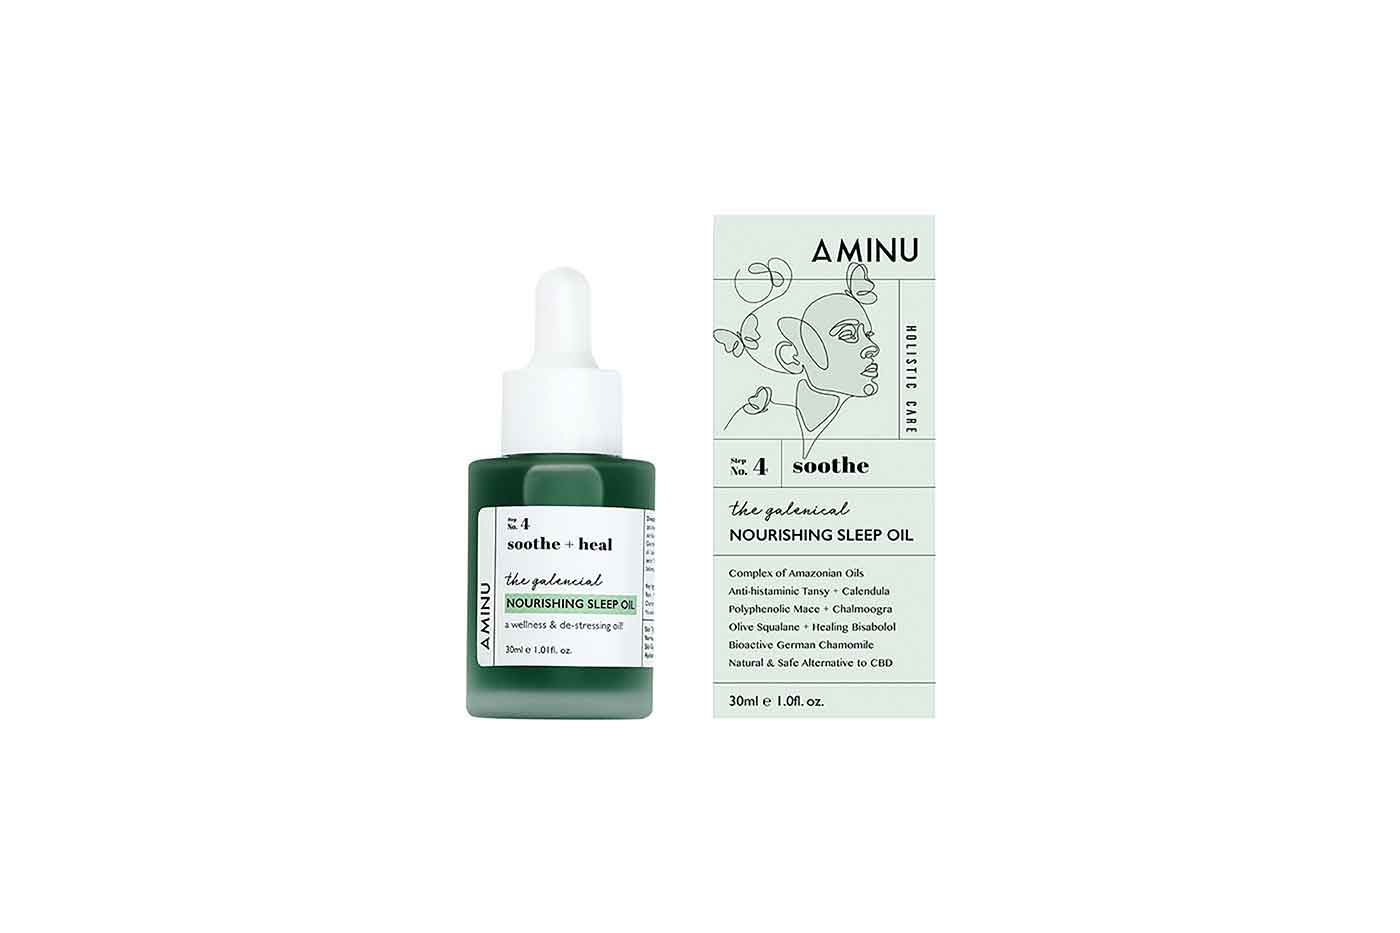 Aminu galenical sleep oil to soothe your senses